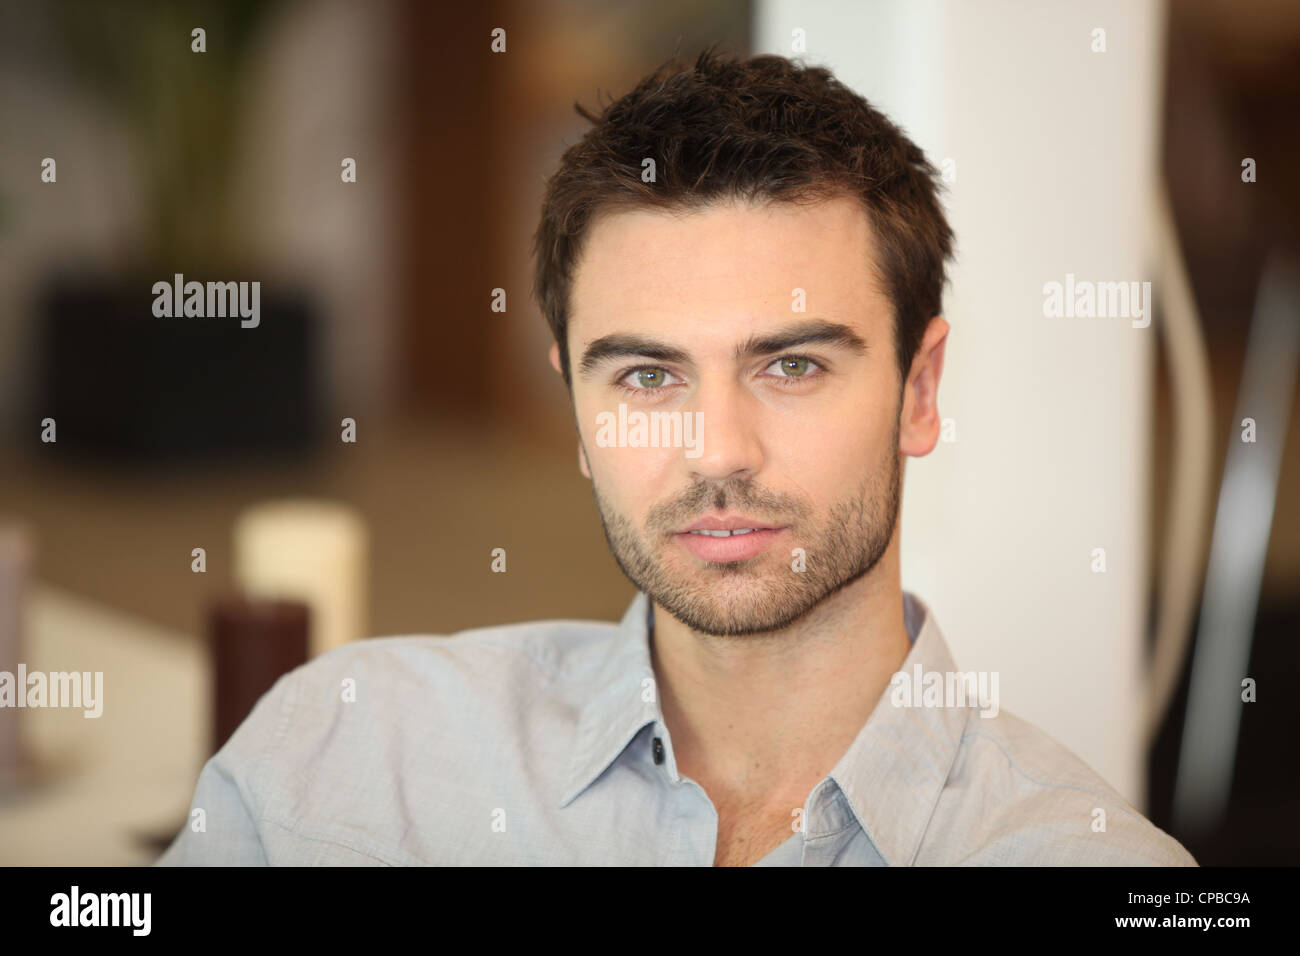 Tired-looking man Stock Photo